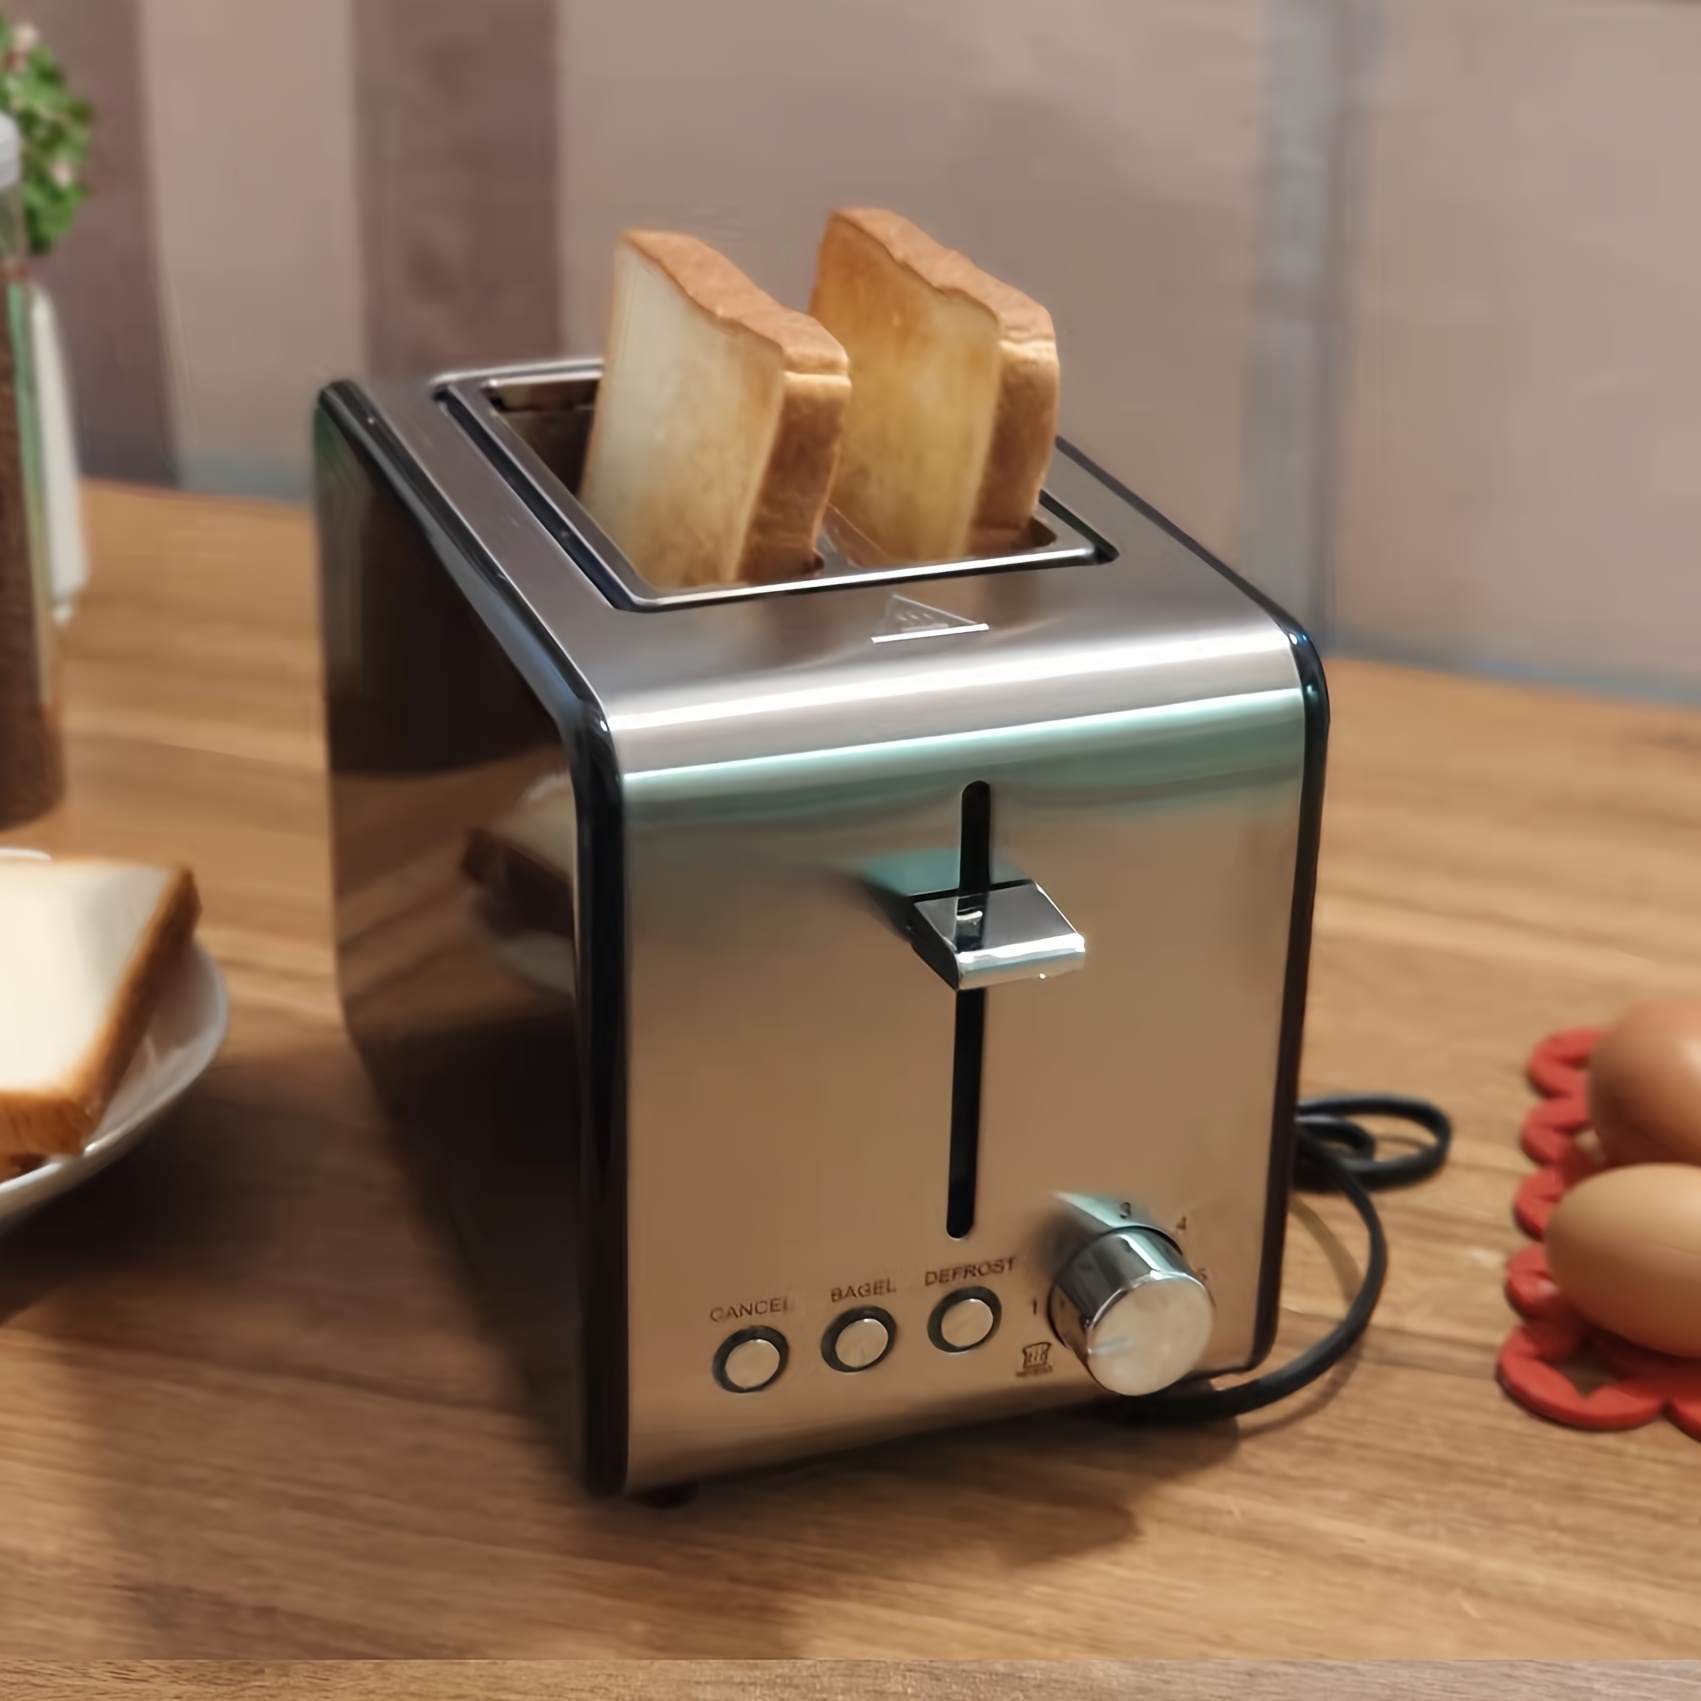 Toaster 2 Slice - Black Best Rated Prime Wide Slot Toasters the for Bagel  Bread Waffle Two with 7 Shade Settings & Removable Crumb Tray